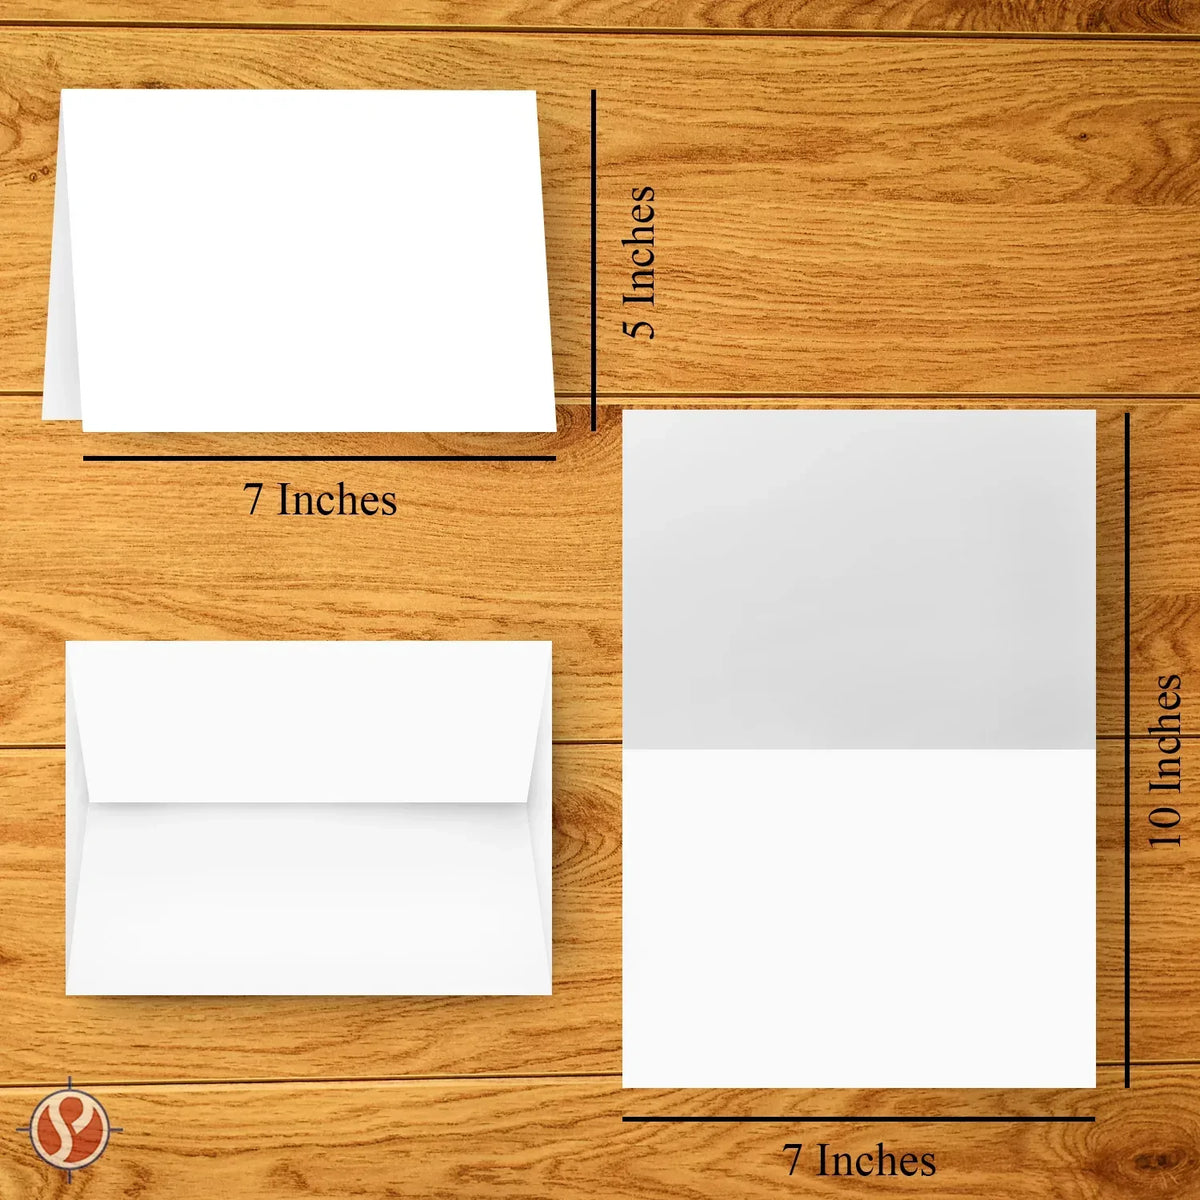 5" X 7" Heavyweight Blank White Greeting Card Sets - 30 Cards & Envelopes FoldCard